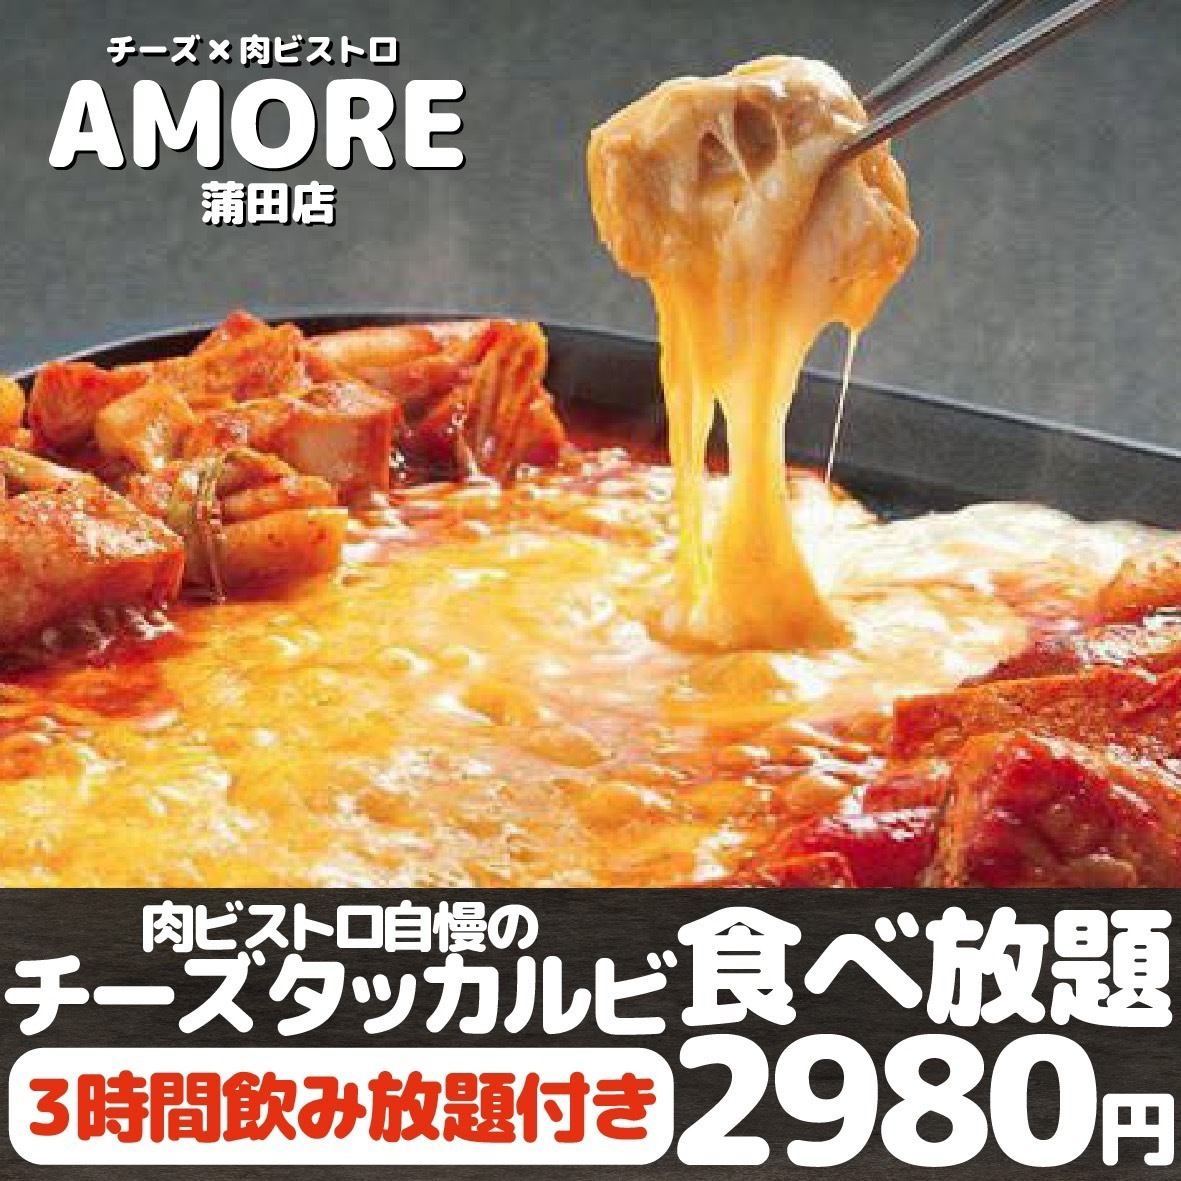 [All you can eat] 3 hours all you can eat and drink cheese dakgalbi course♪ 2480 yen